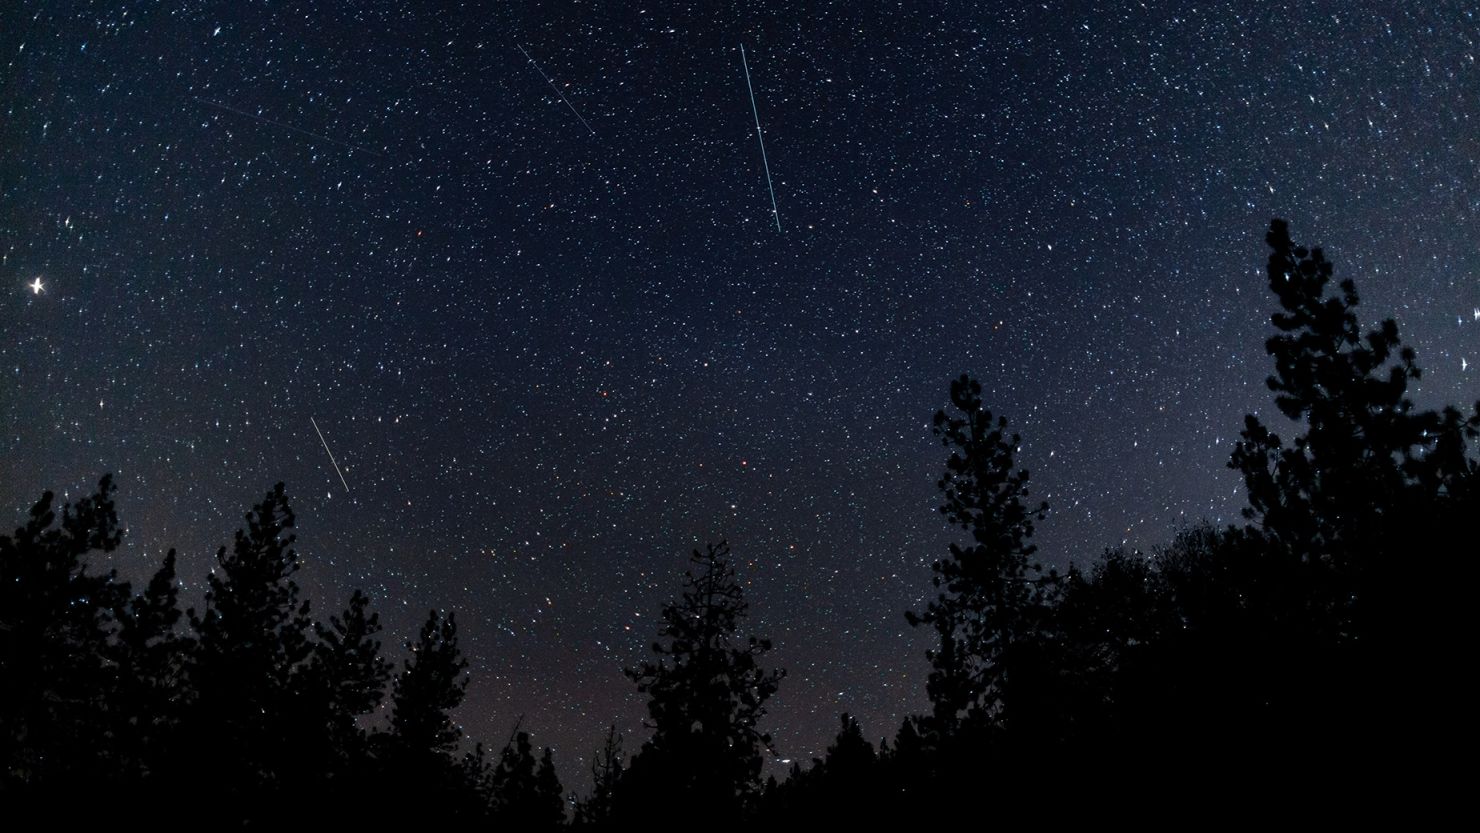 The 2020 Northern Taurid meteor shower produces bright streaks over Ashland, Oregon. In 2023, the celestial event will peak during the evening of November 12.